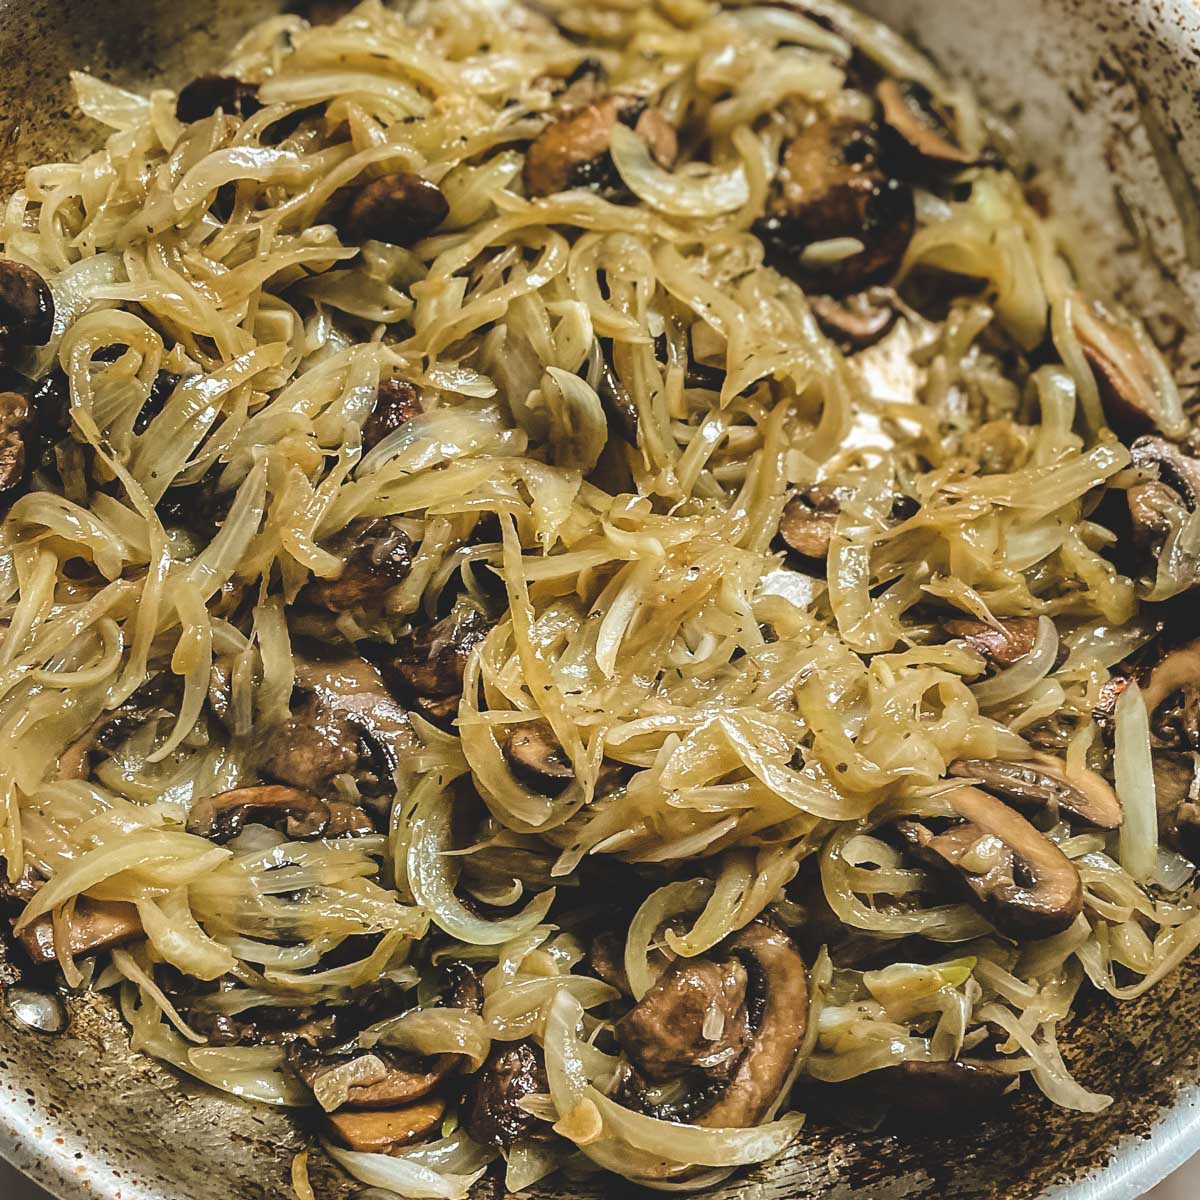 The mushrooms and onions are shown after 30 minutes and they are a light golden color and soft.